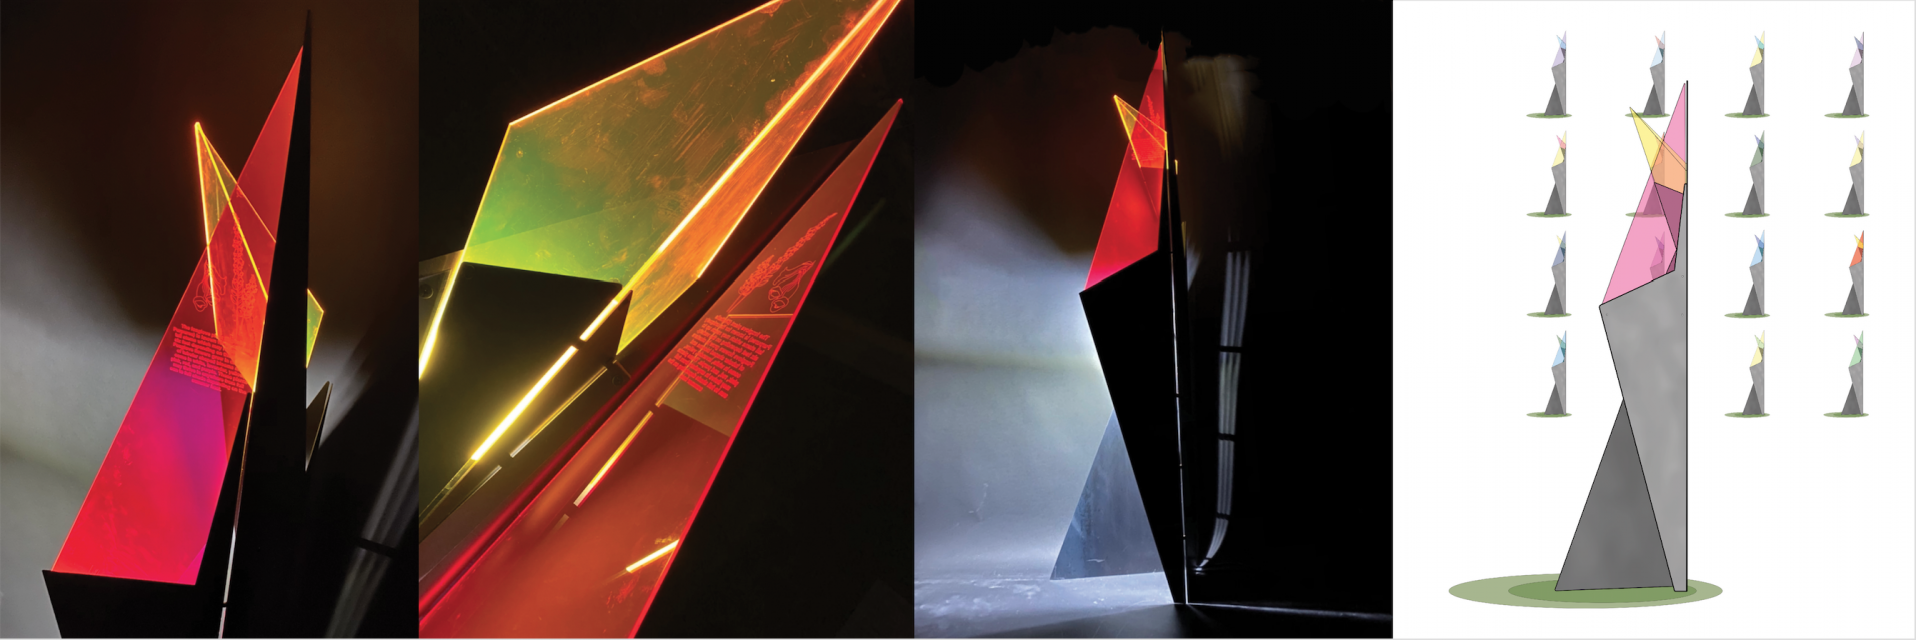 A series of images depicting a modern standing lamp. The first three show the build lamp, comprised of dark metal and the top being glowing colored acrylic. The fourth image is a drawn render depicting different color schemes and the basic lamp design. 